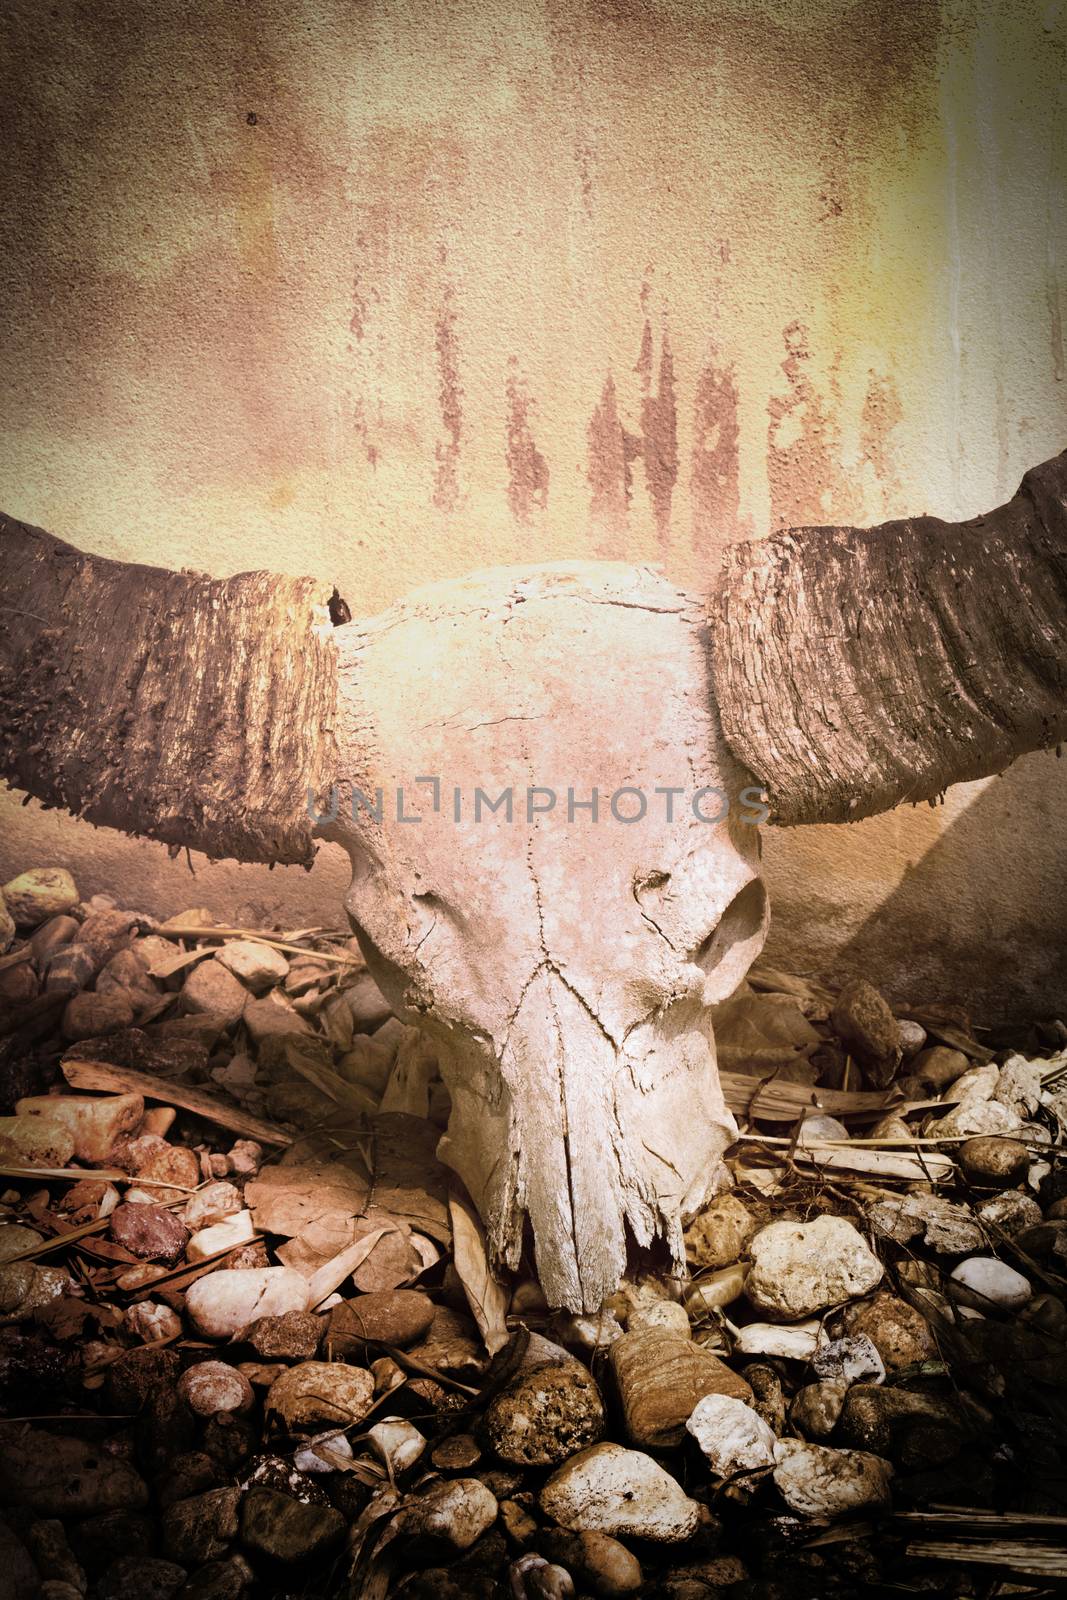 buffalo skull vintage style picture sepia color